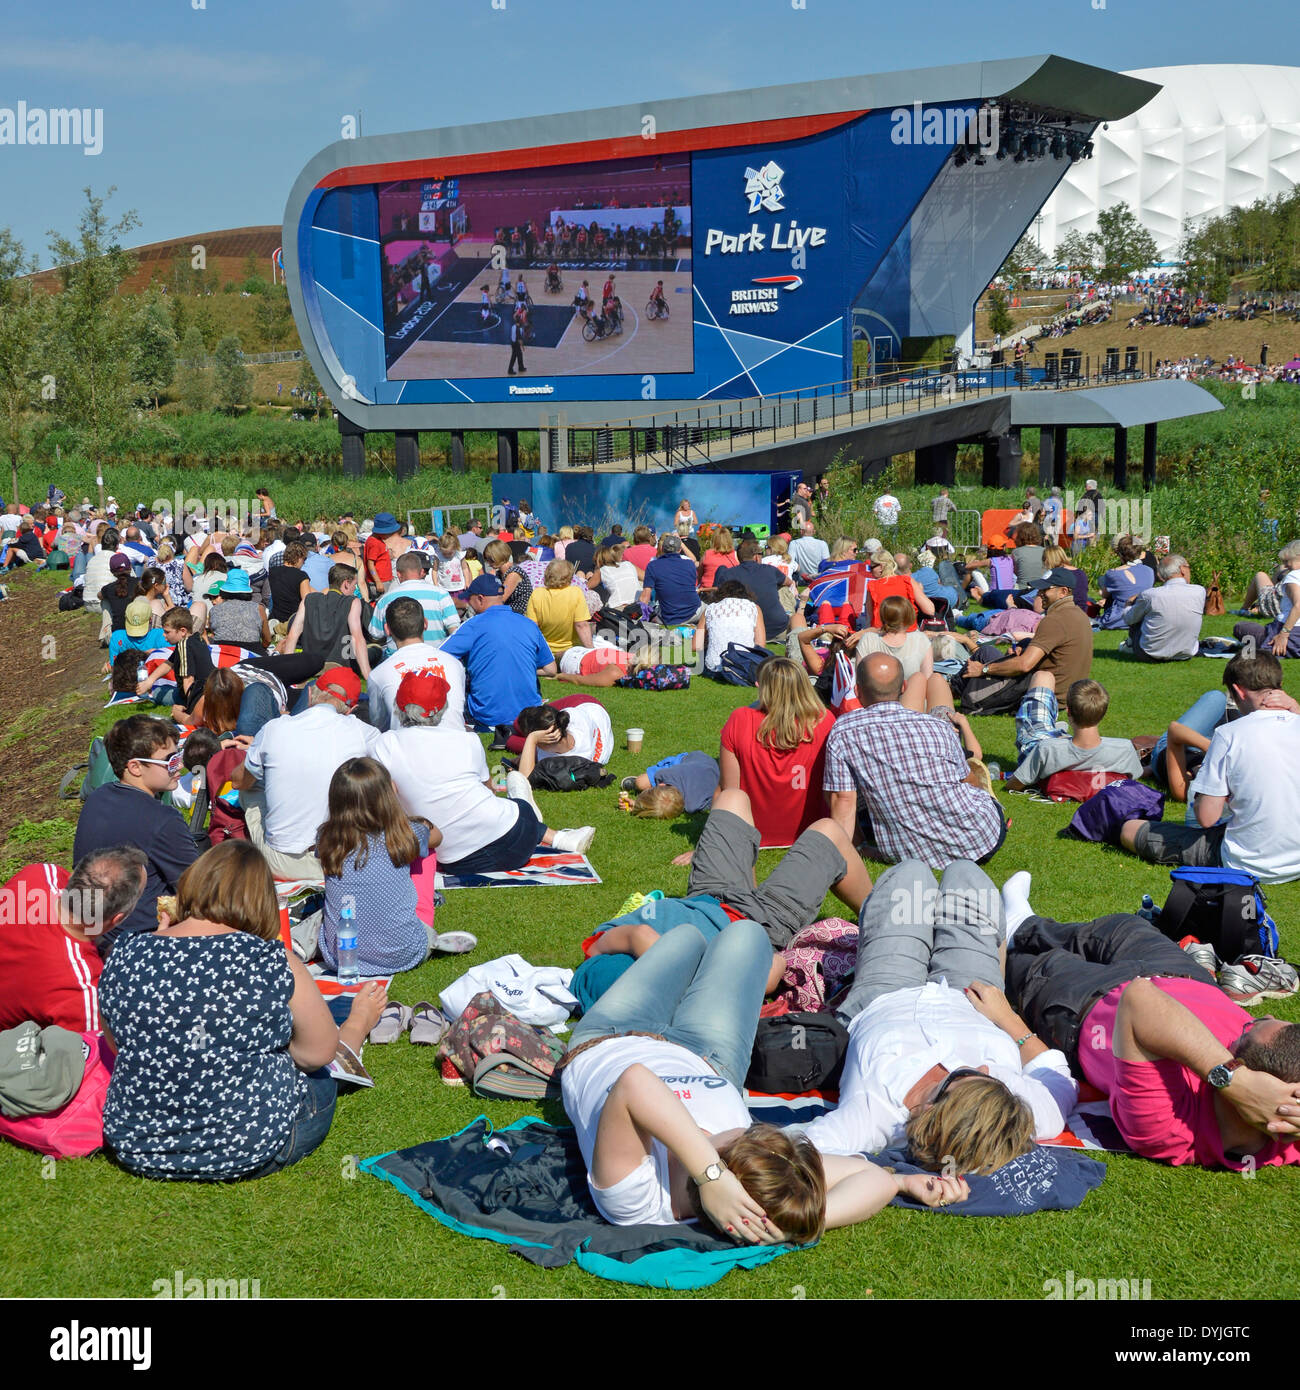 Big two sided TV screen in London 2012 Olympic Park with spectators relaxing watching Paralympic Games on a hot summers day Stock Photo